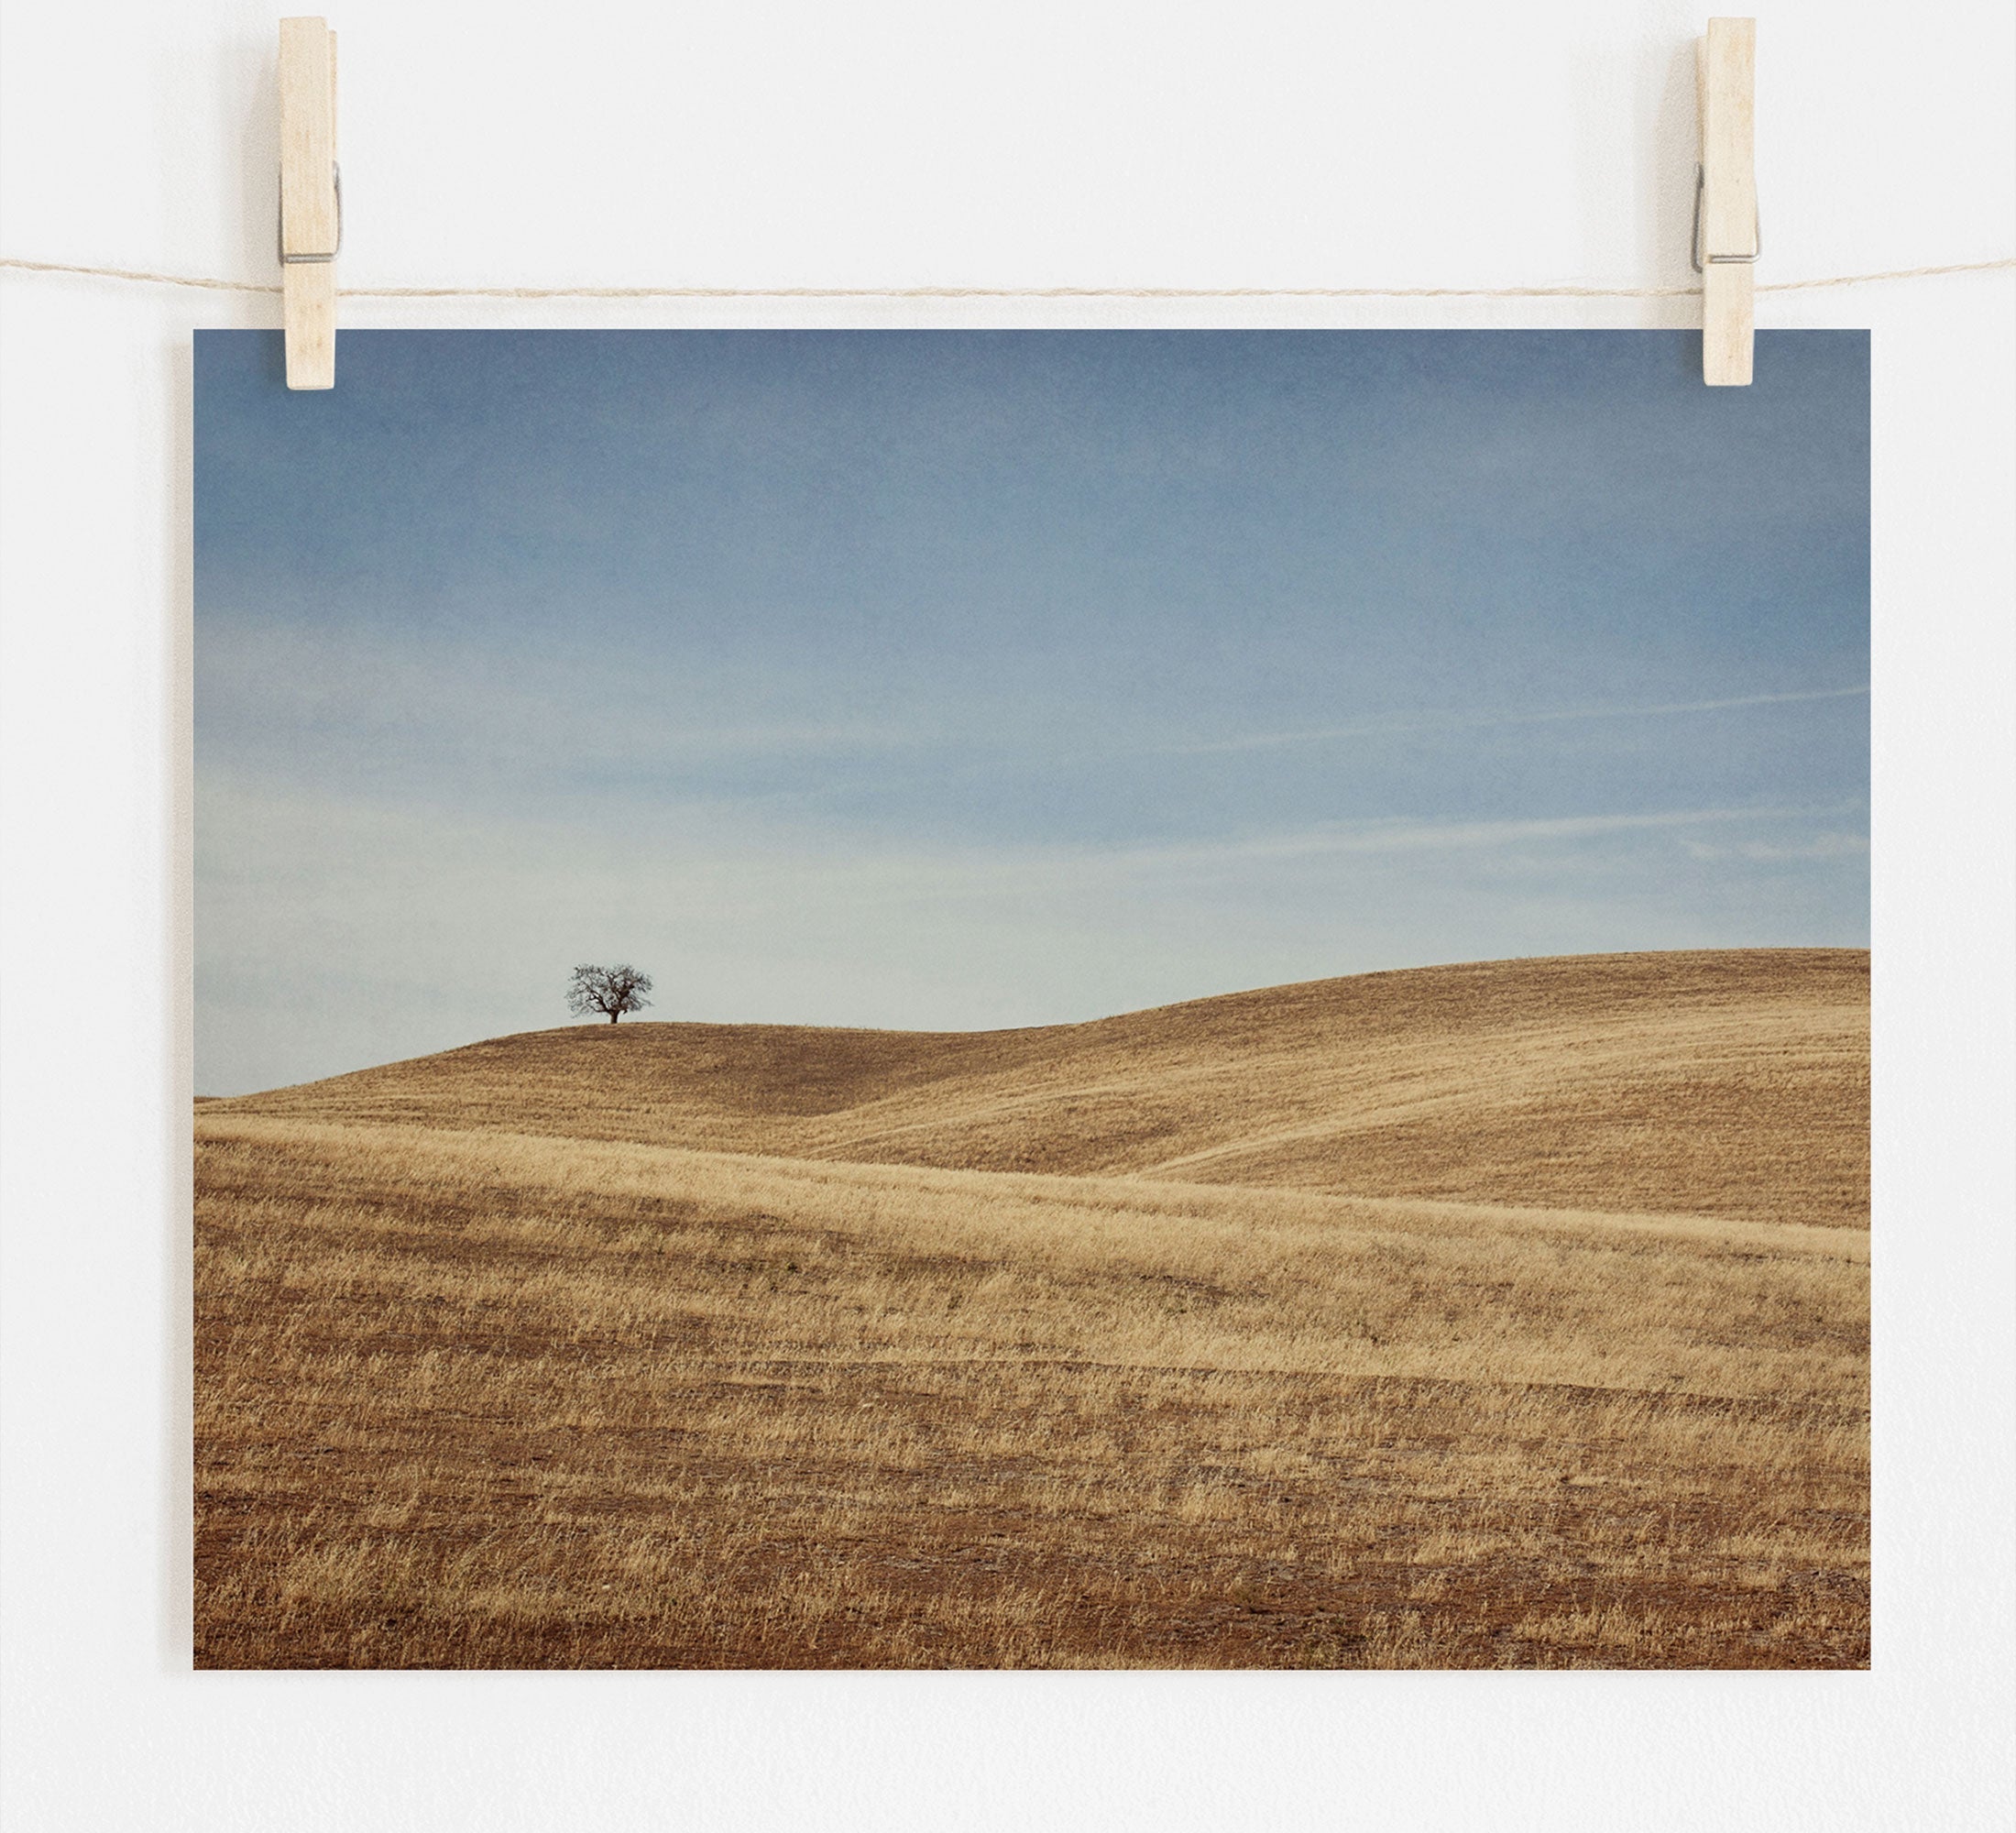 A photograph of a solitary tree in Santa Ynez Valley on a gently rolling hill, pinned up to dry on a clothesline against a white wall. The Offley Green California Central Coast Landscape Print 'Golden Ynez' is bathed in soft, natural colors.